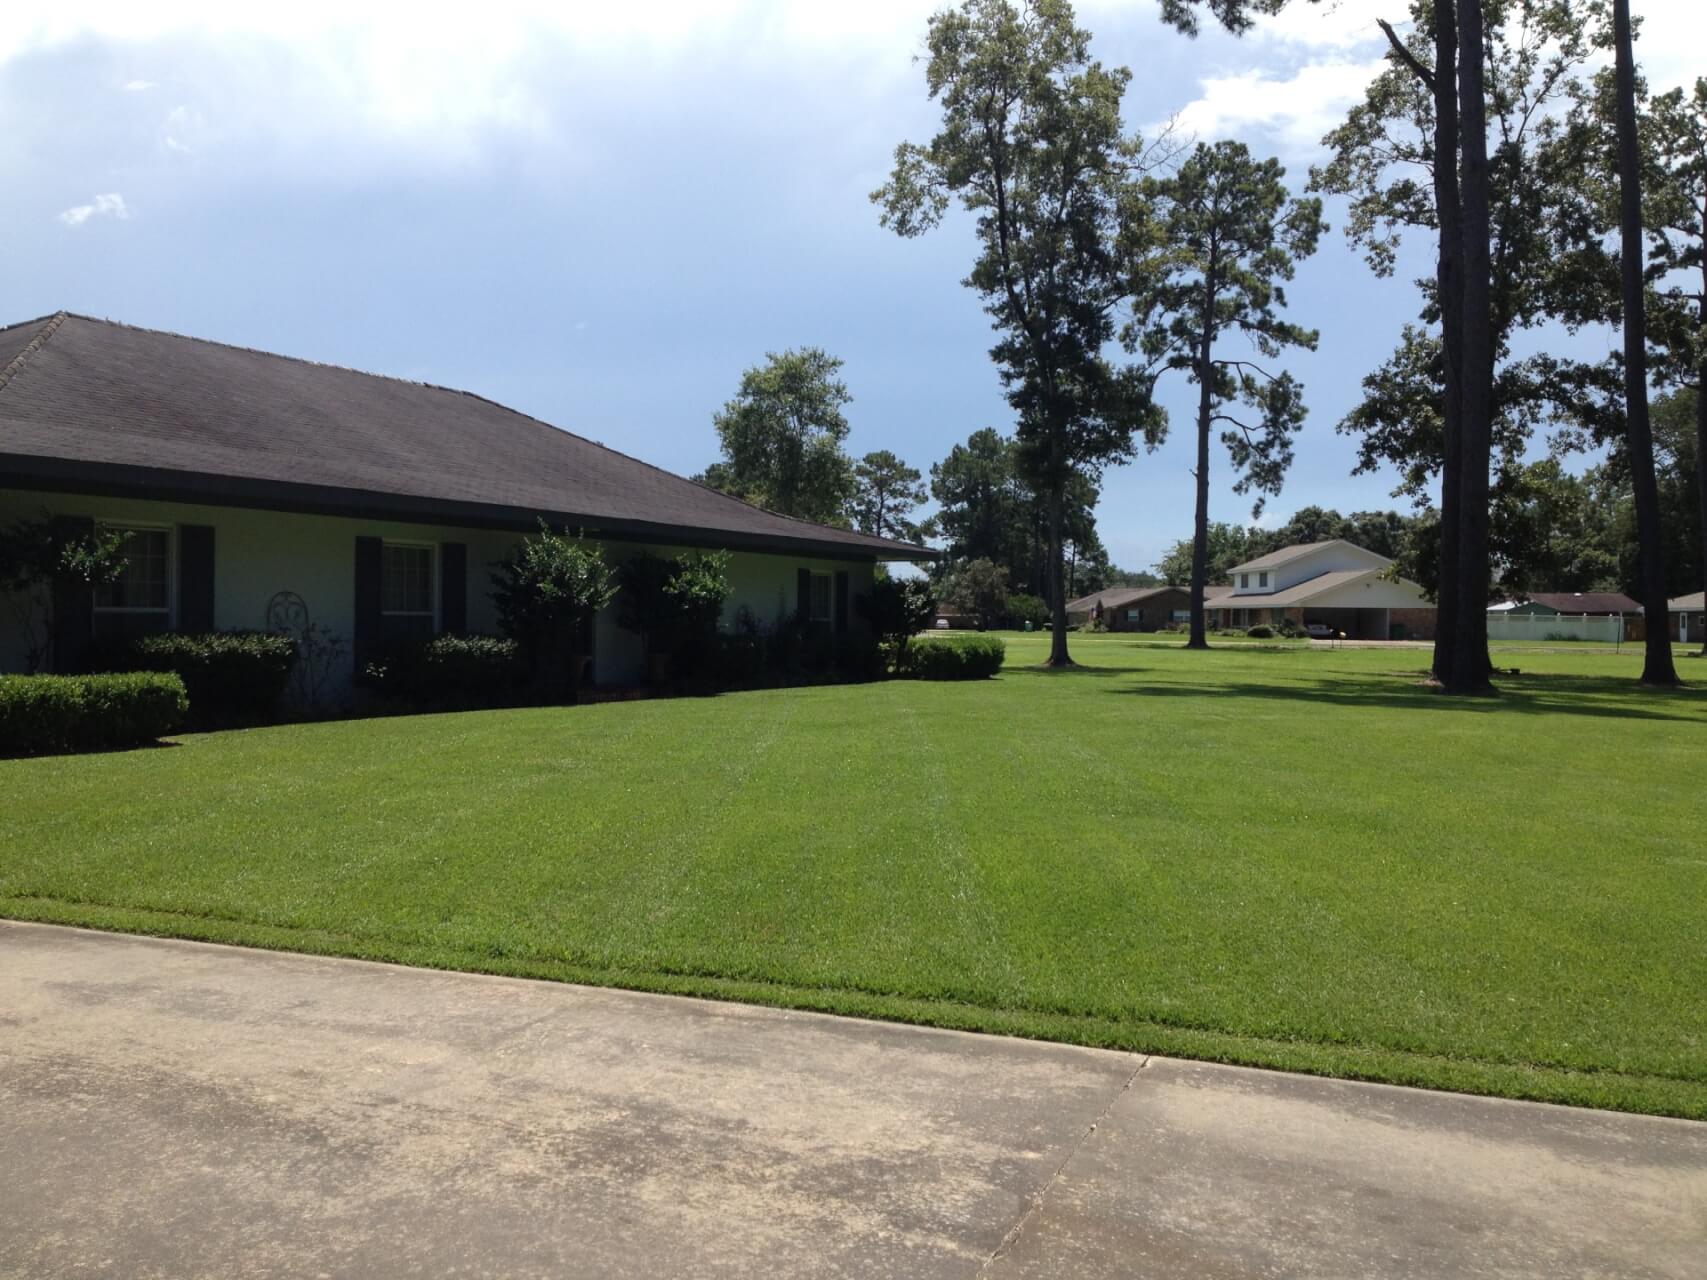 Lawn Care Edging Trimming Crowley Lafayette LA Just the Basics 50011